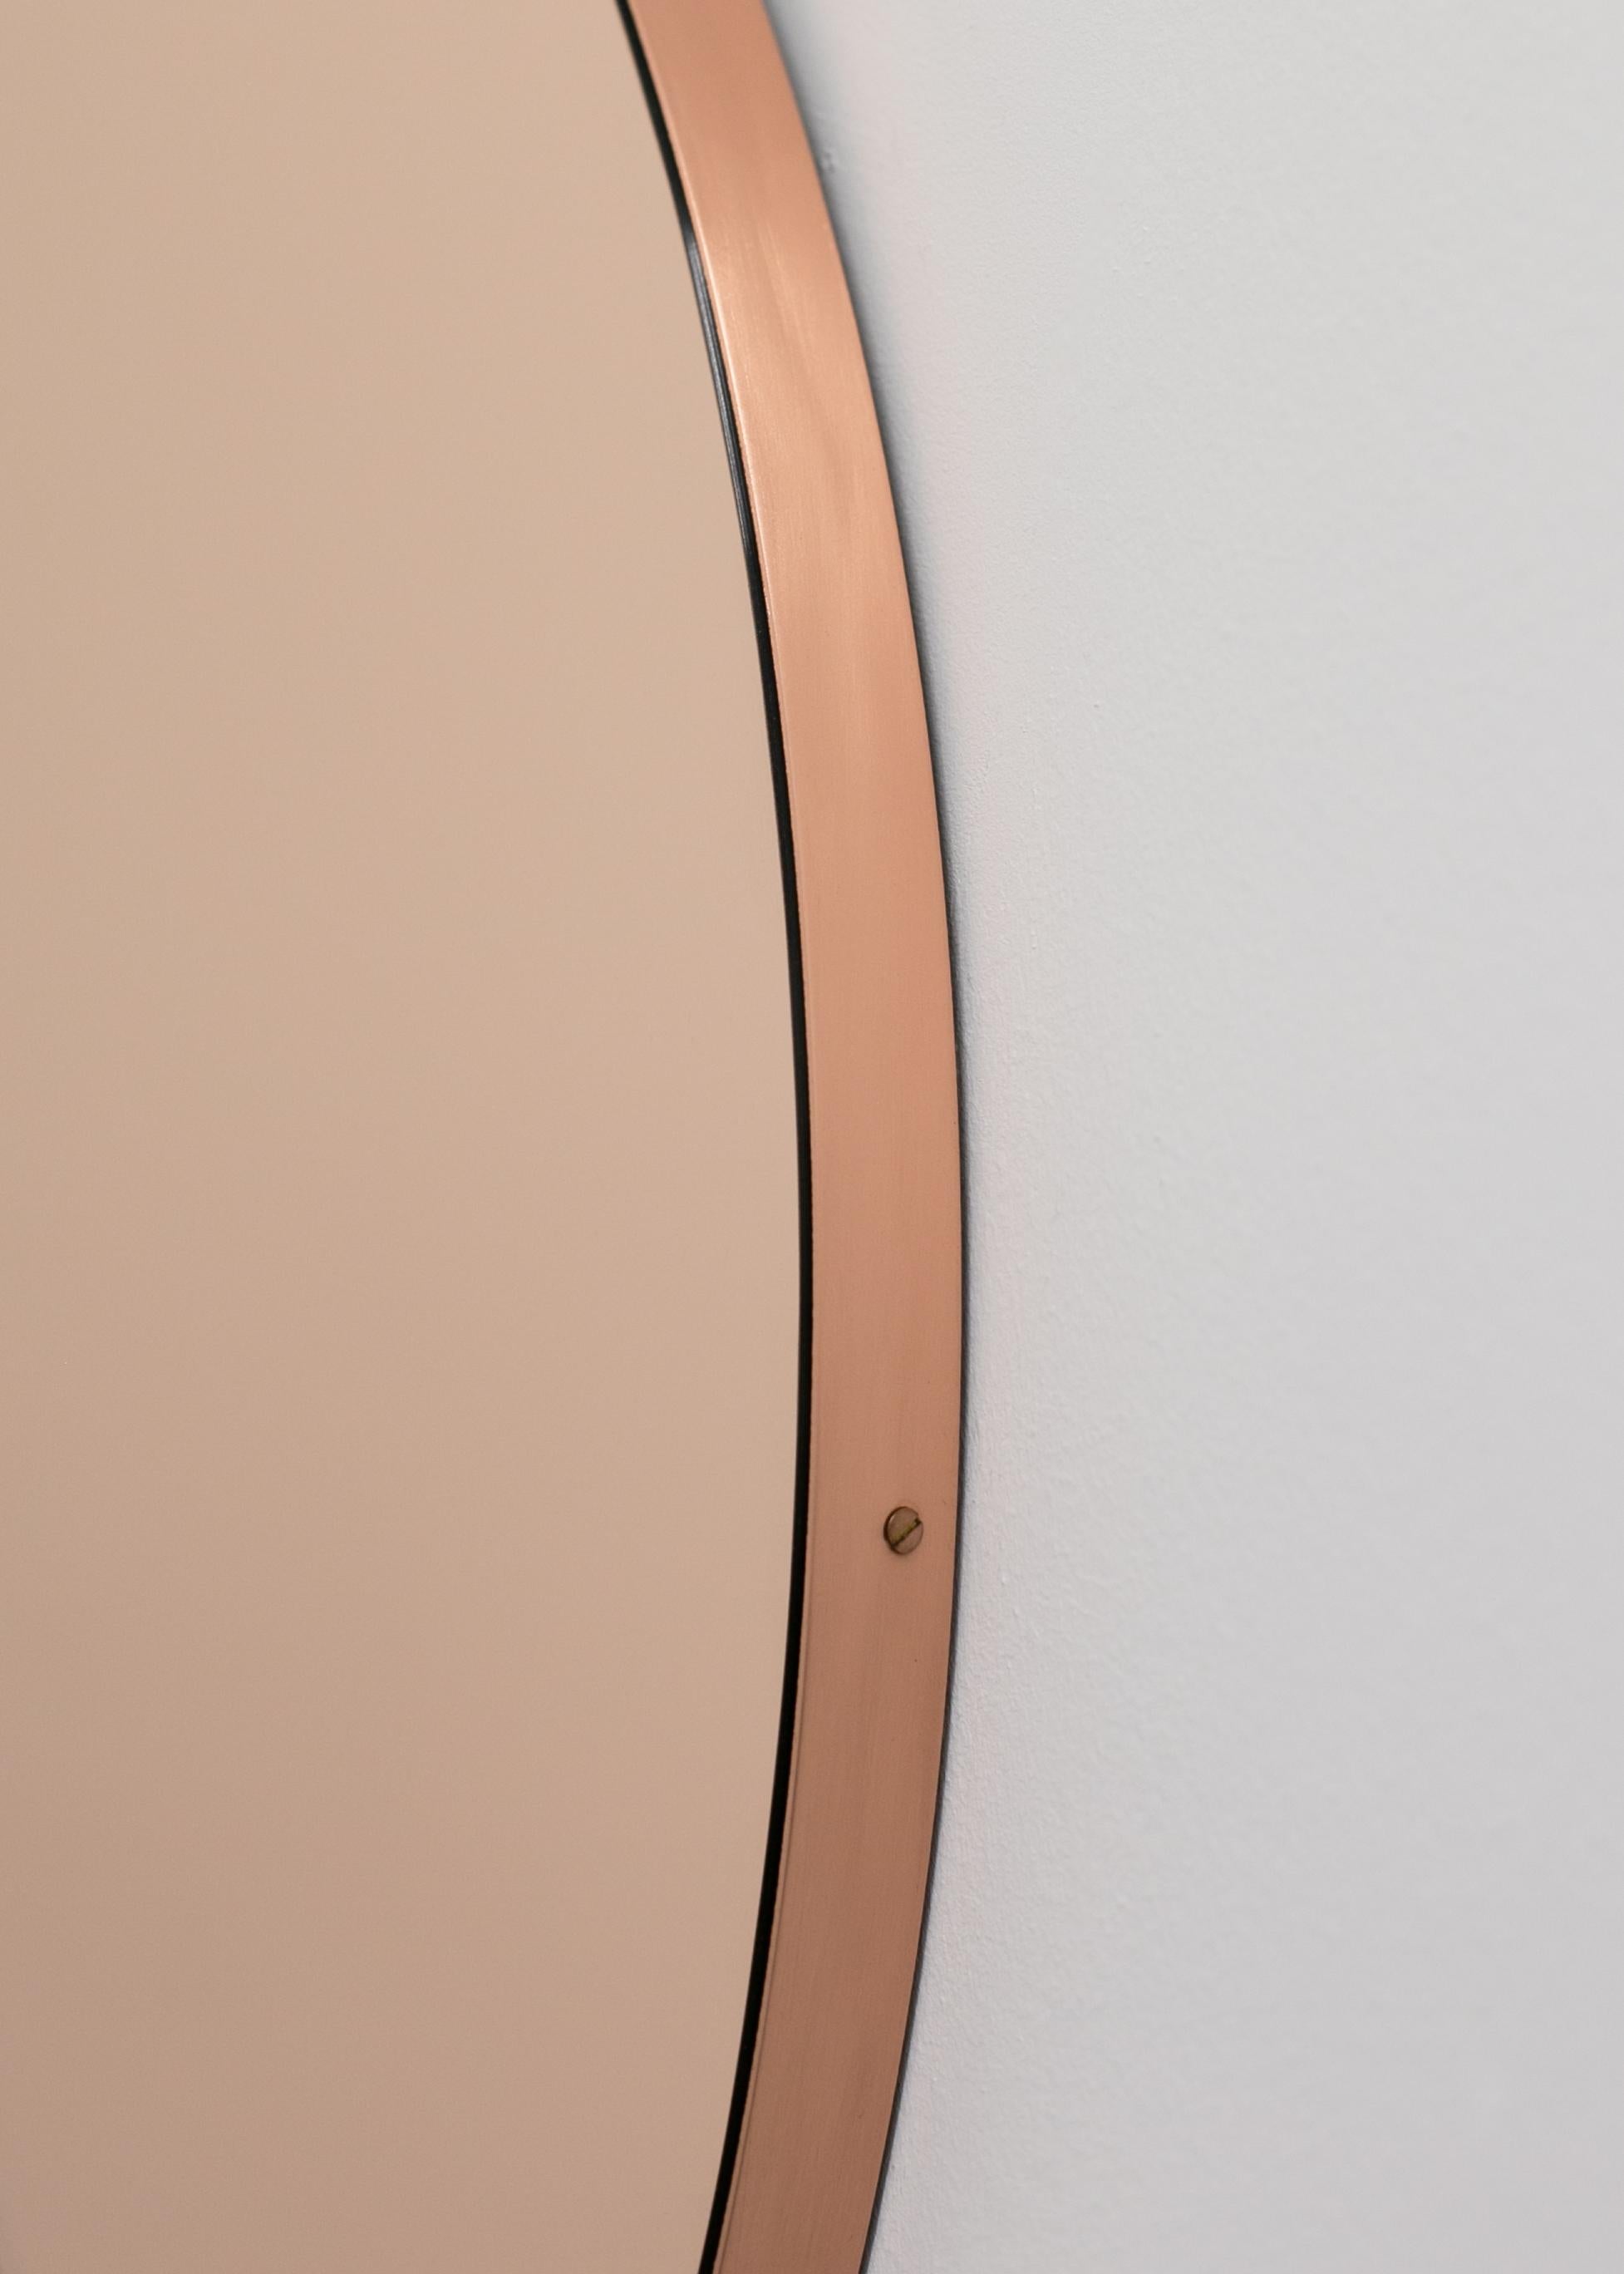 rose gold oval mirror